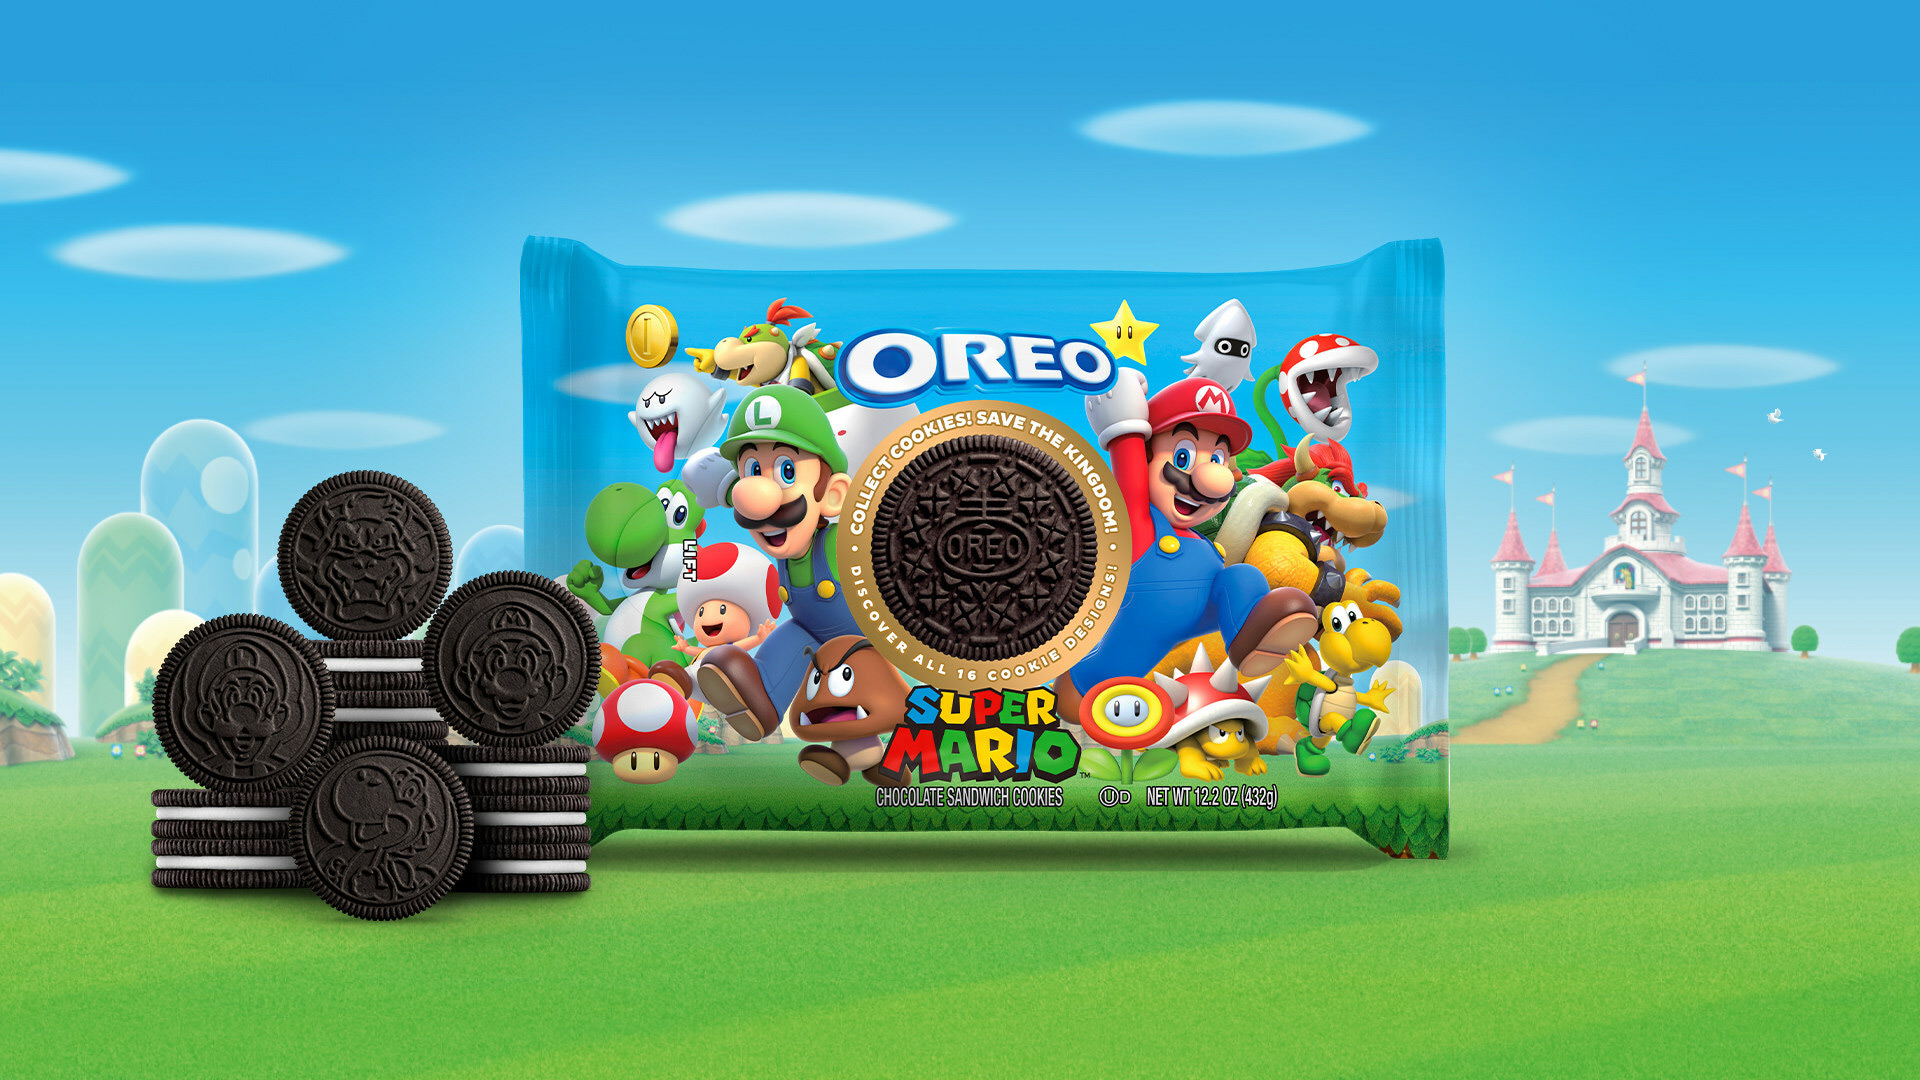 Super Mario OREO cookies will be available for a limited time